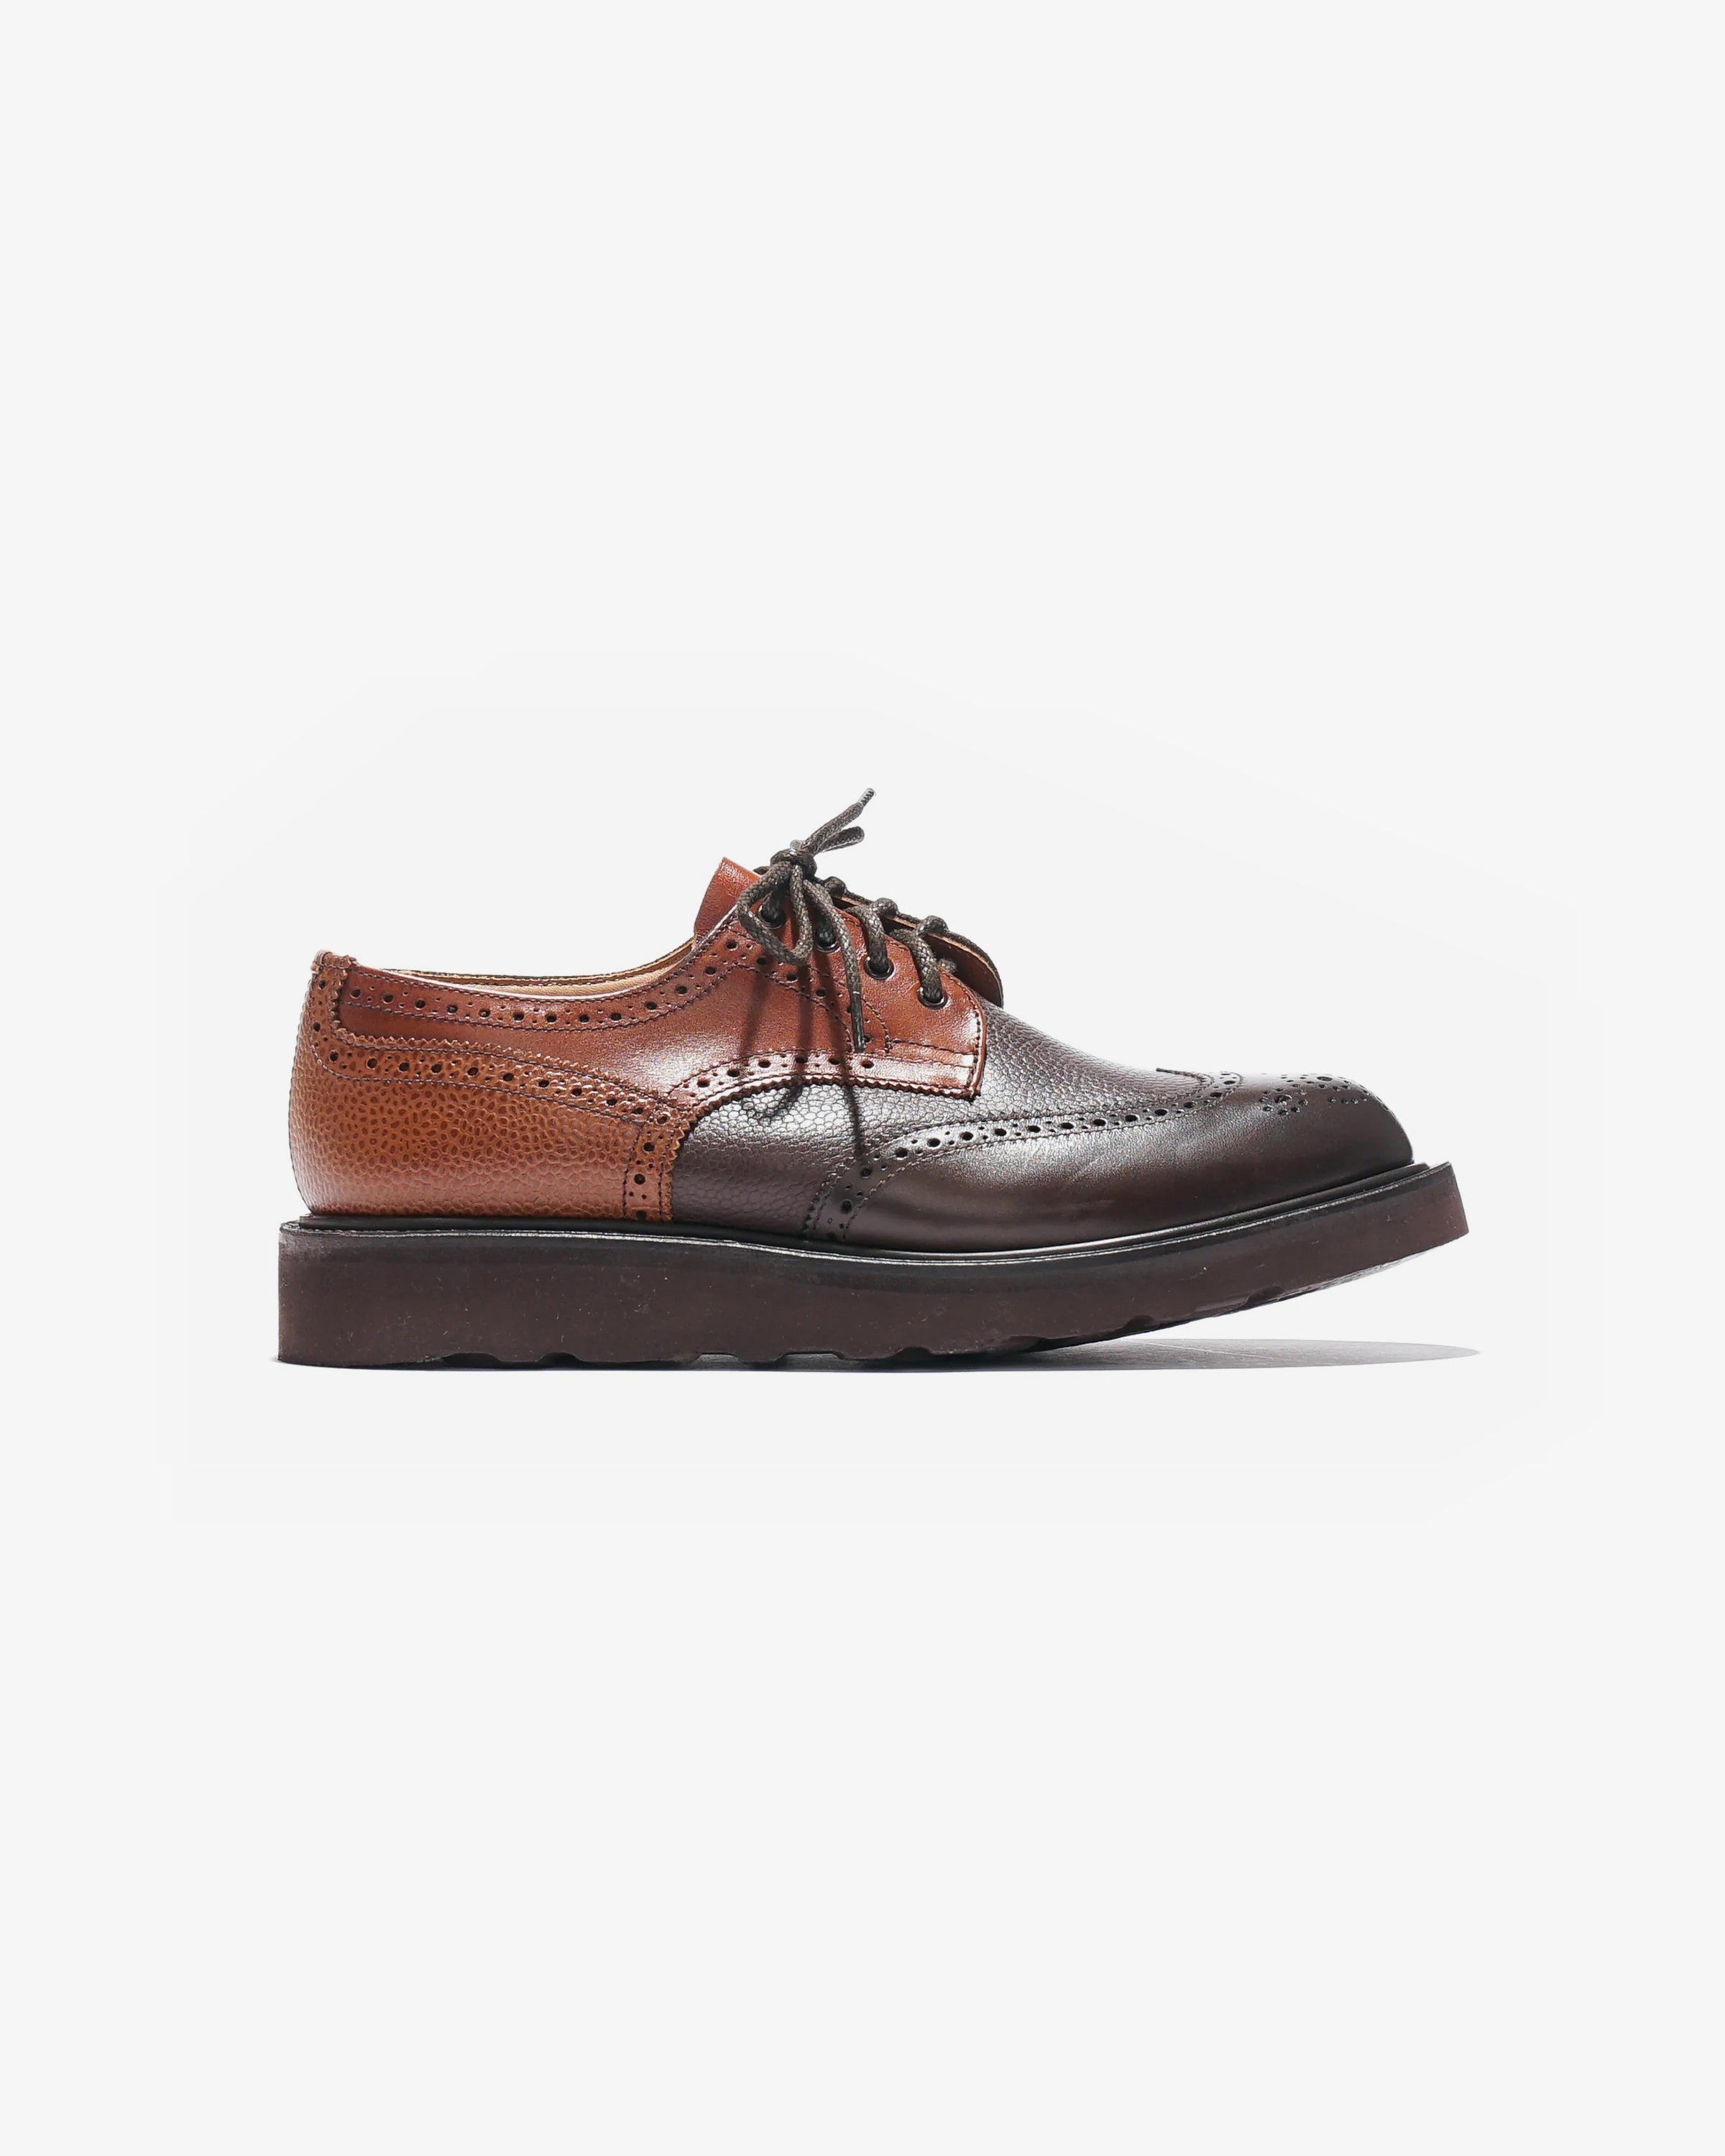 Tricker's x Nepenthes Multi-Tone Derby - Moreflex Sole - Brown – Tricker's x Nepenthes – Nepenthes London